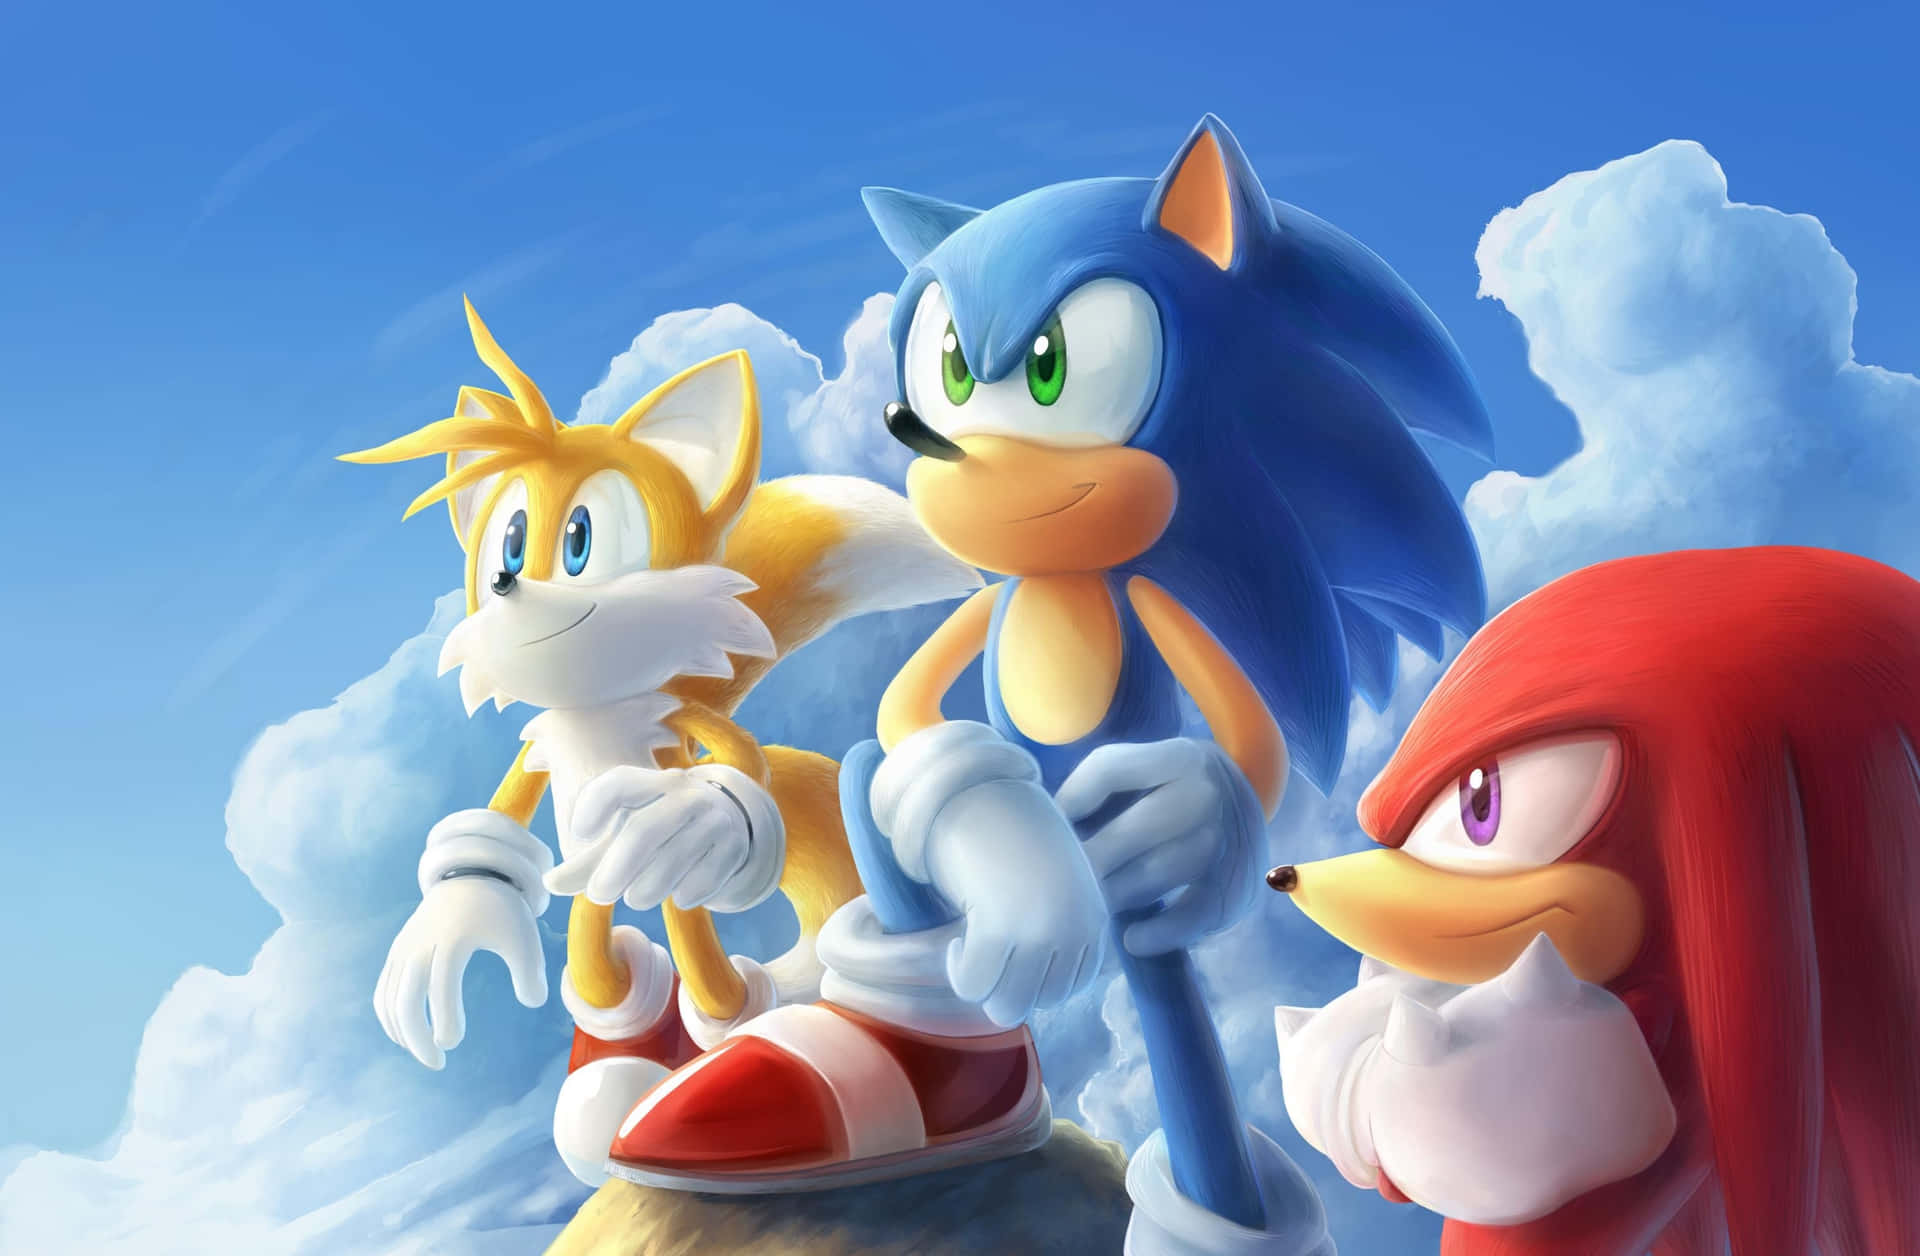 "Sonic 2 proves to be the much-needed sequel to the iconic original." Wallpaper